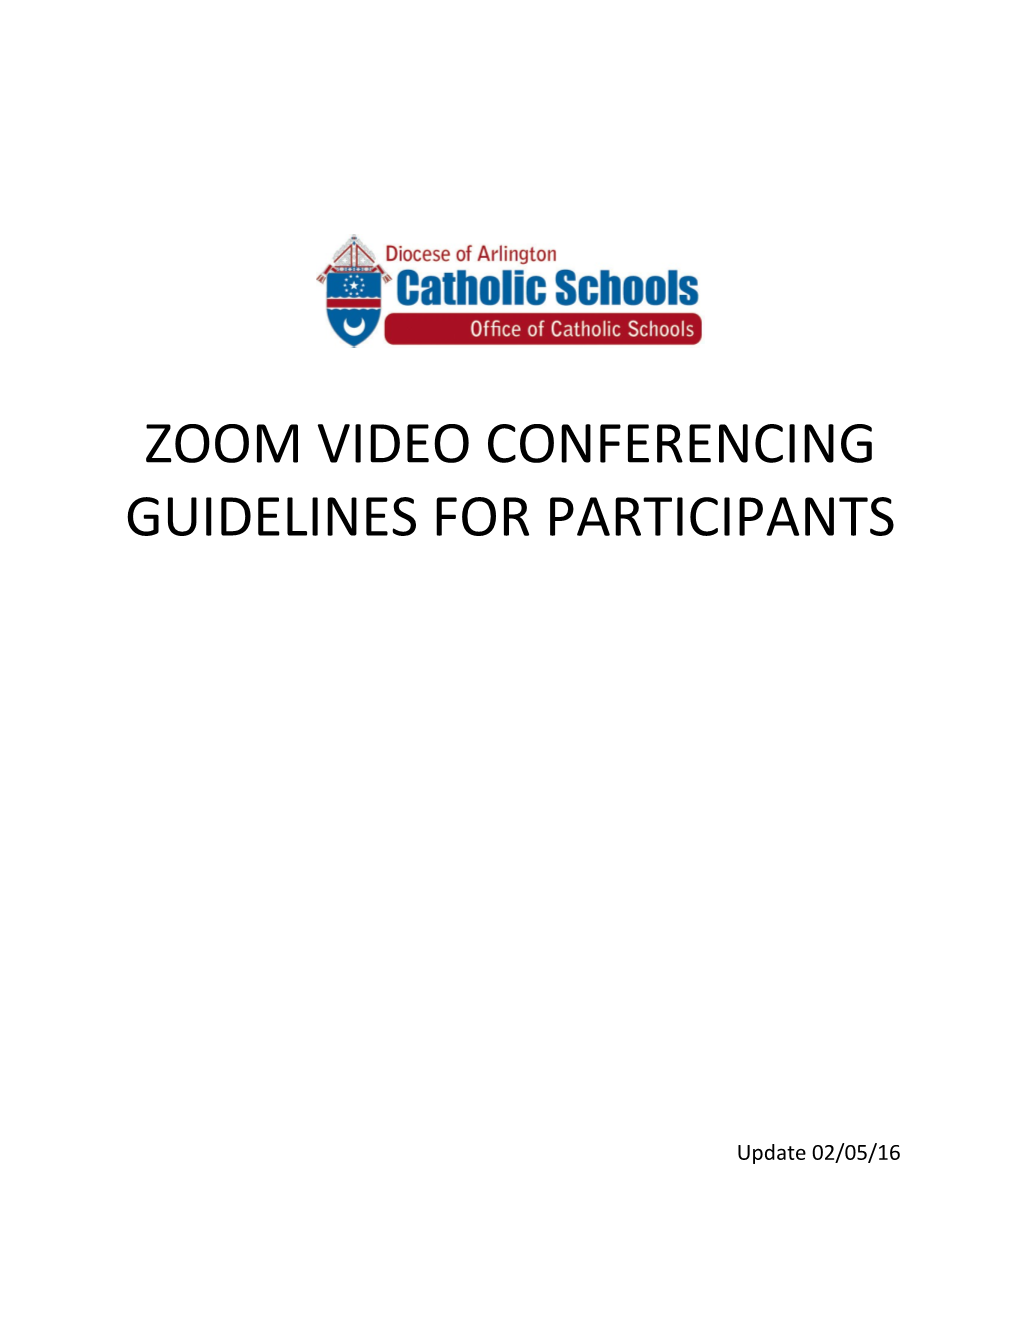 Zoom Video Conferencing Guidelines for Participants